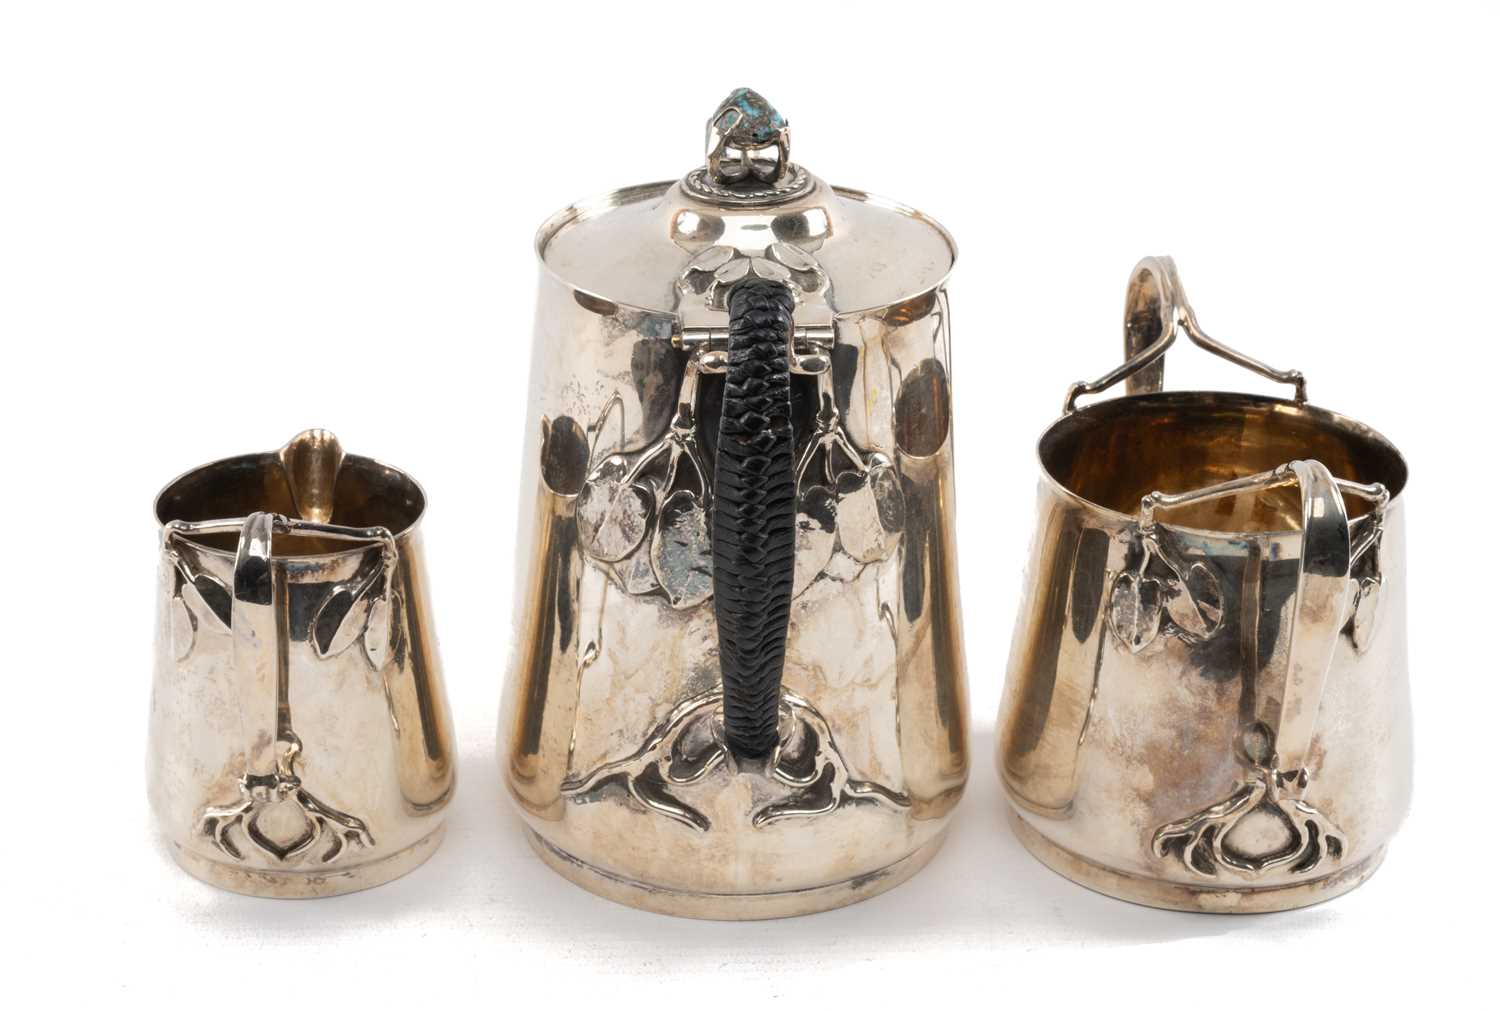 RARE SCOTTISH ARTS & CRAFTS SILVER COFFEE SERVICE each element cylindrical, tapered and with - Image 3 of 34